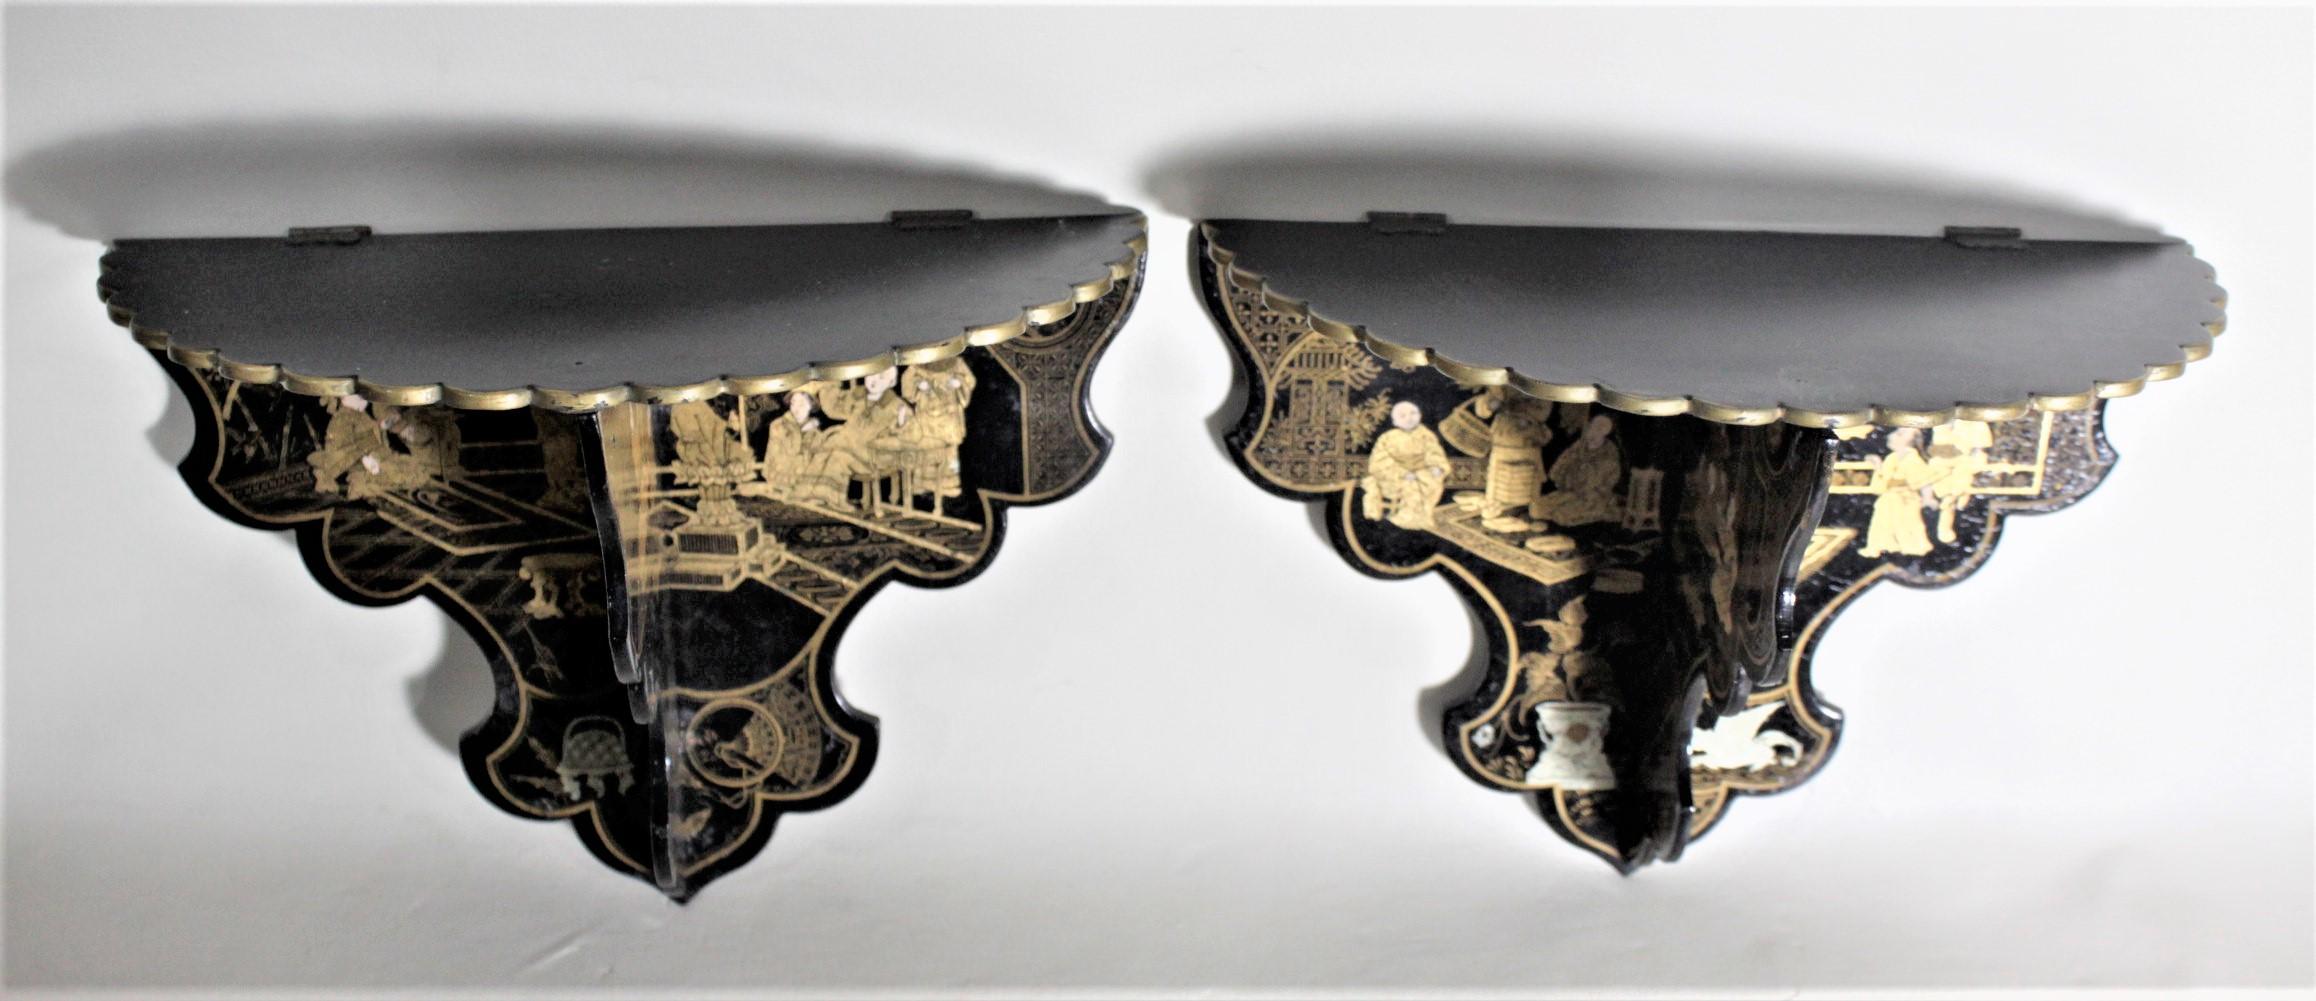 This pair of collapsible wall shelves or brackets are unsigned, but presumed to have been made in China in approximately 1920 in the period Chinese Export style. The shelves clip together with small brass clips and hinges and are done in a glossy